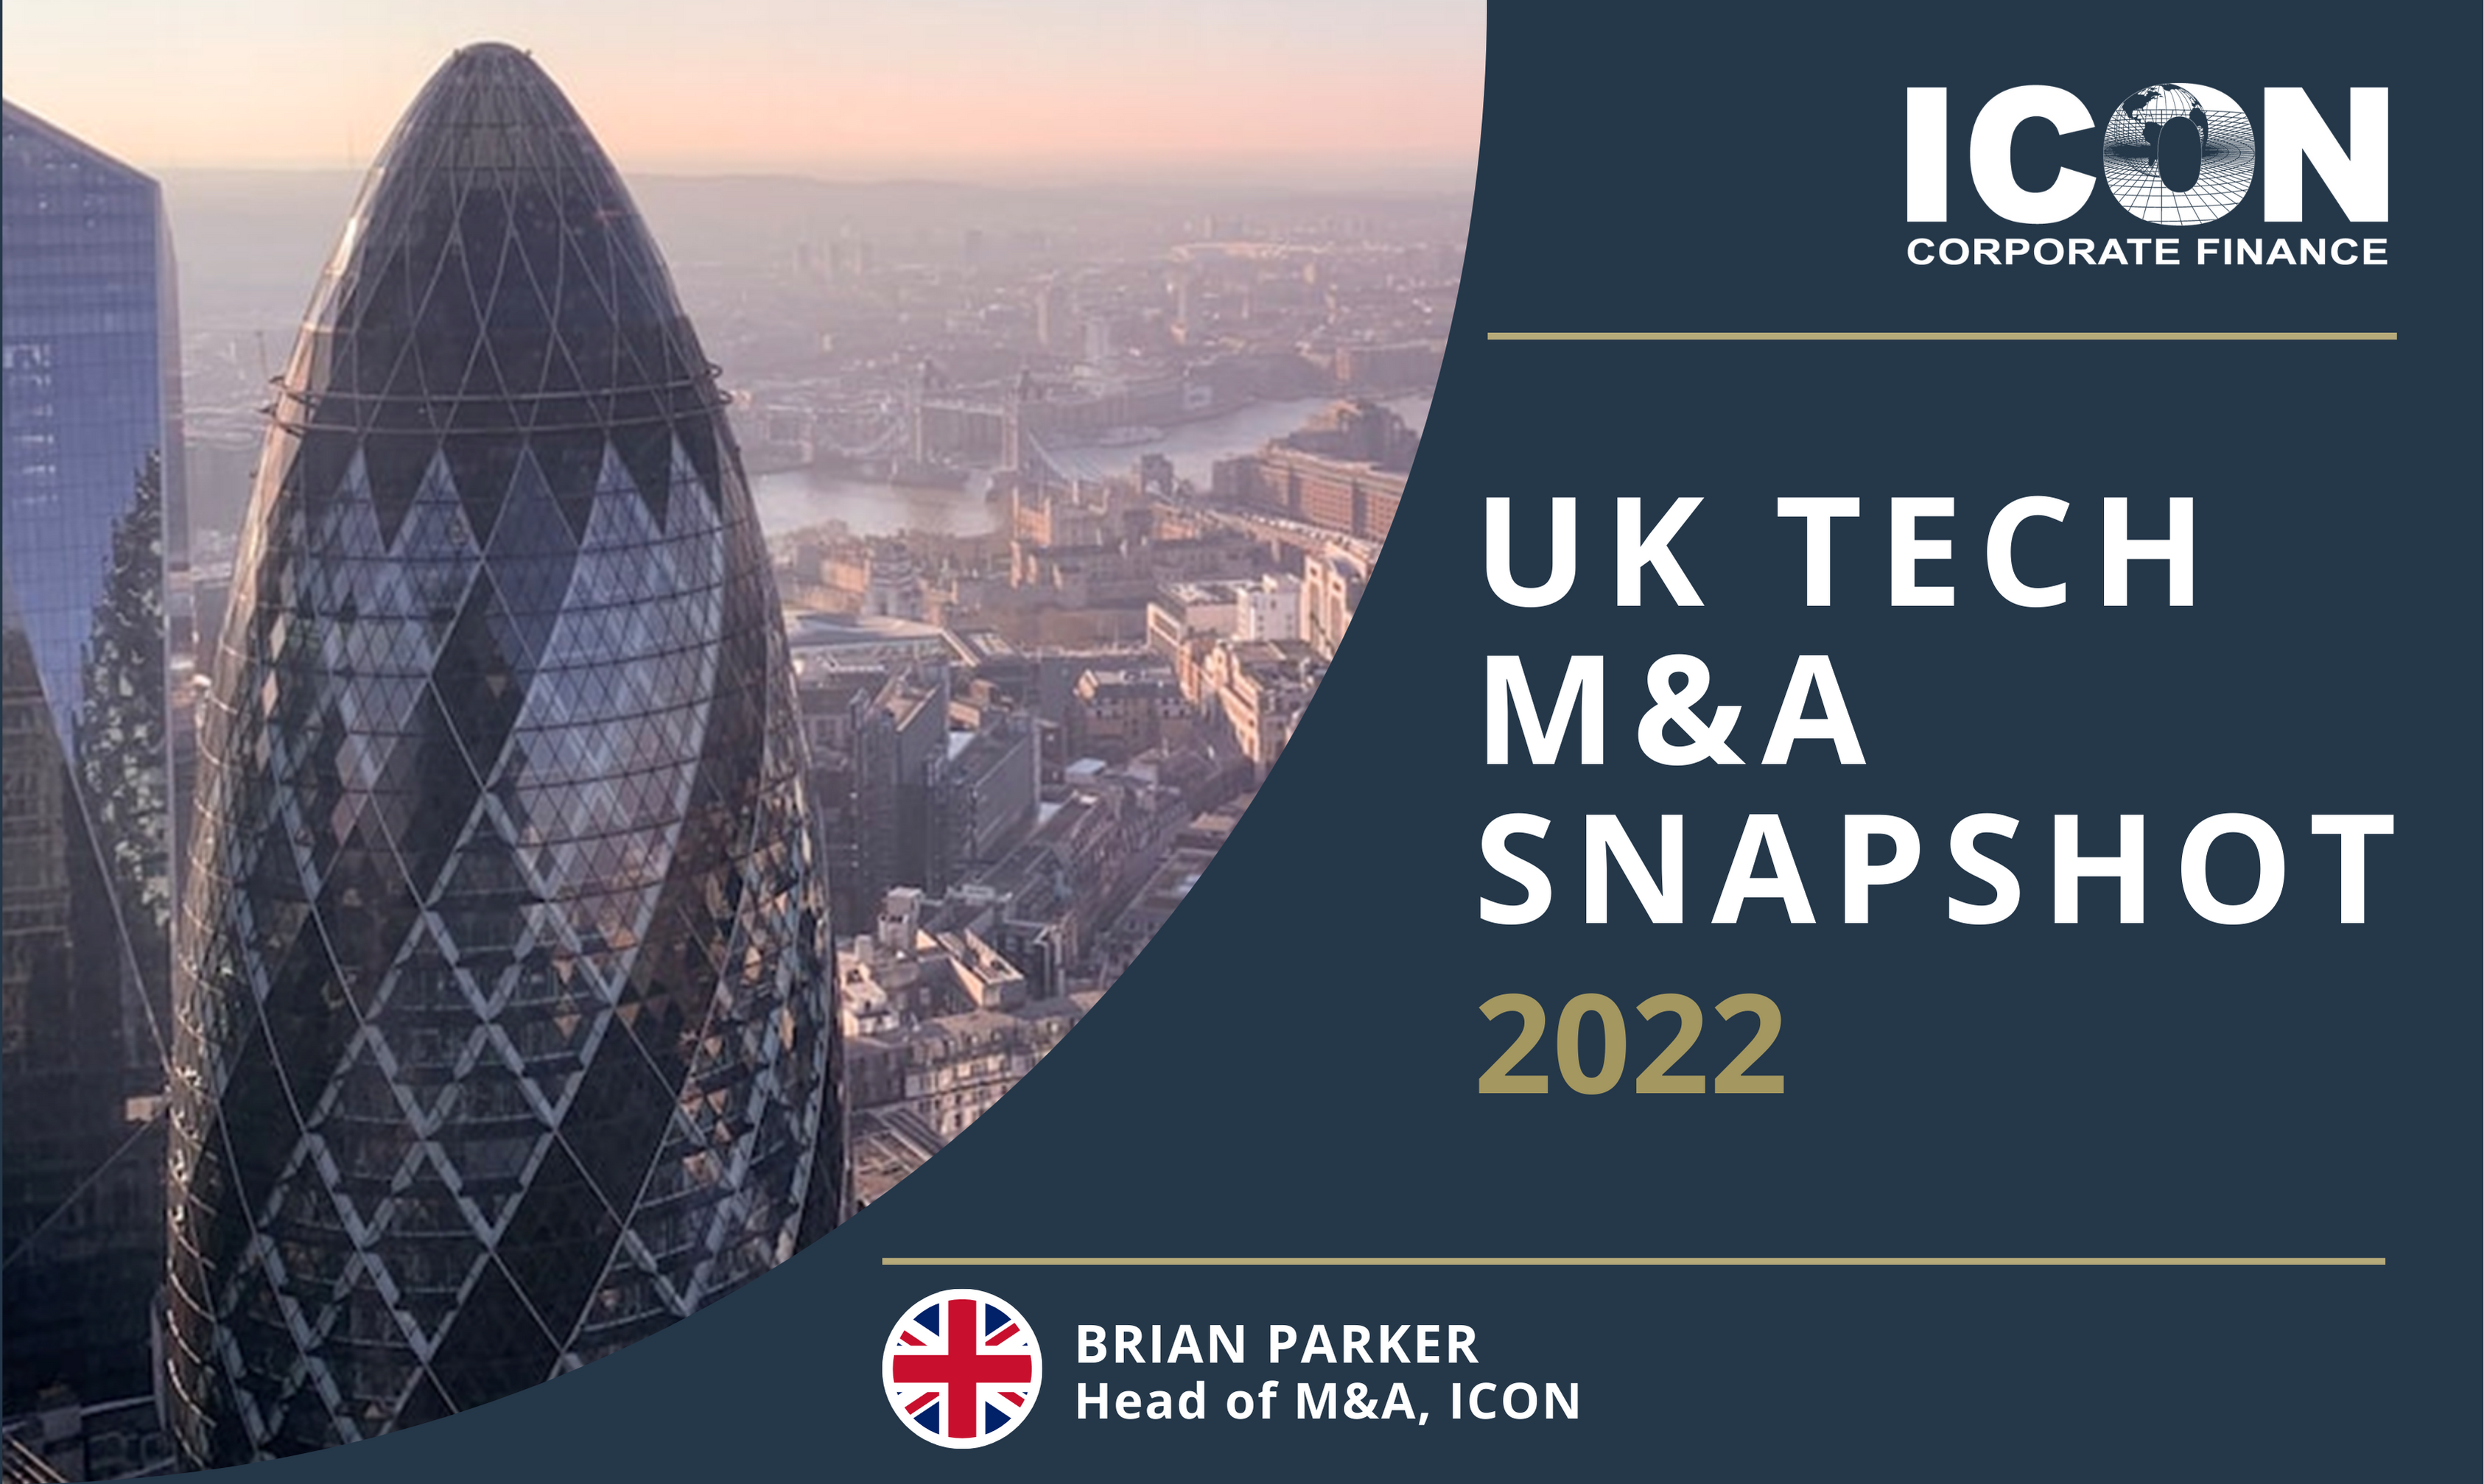 Foreign and PE Buyers Boost Surprisingly High Deal Count in UK Tech M&A, Reveals ICON Corporate Finance